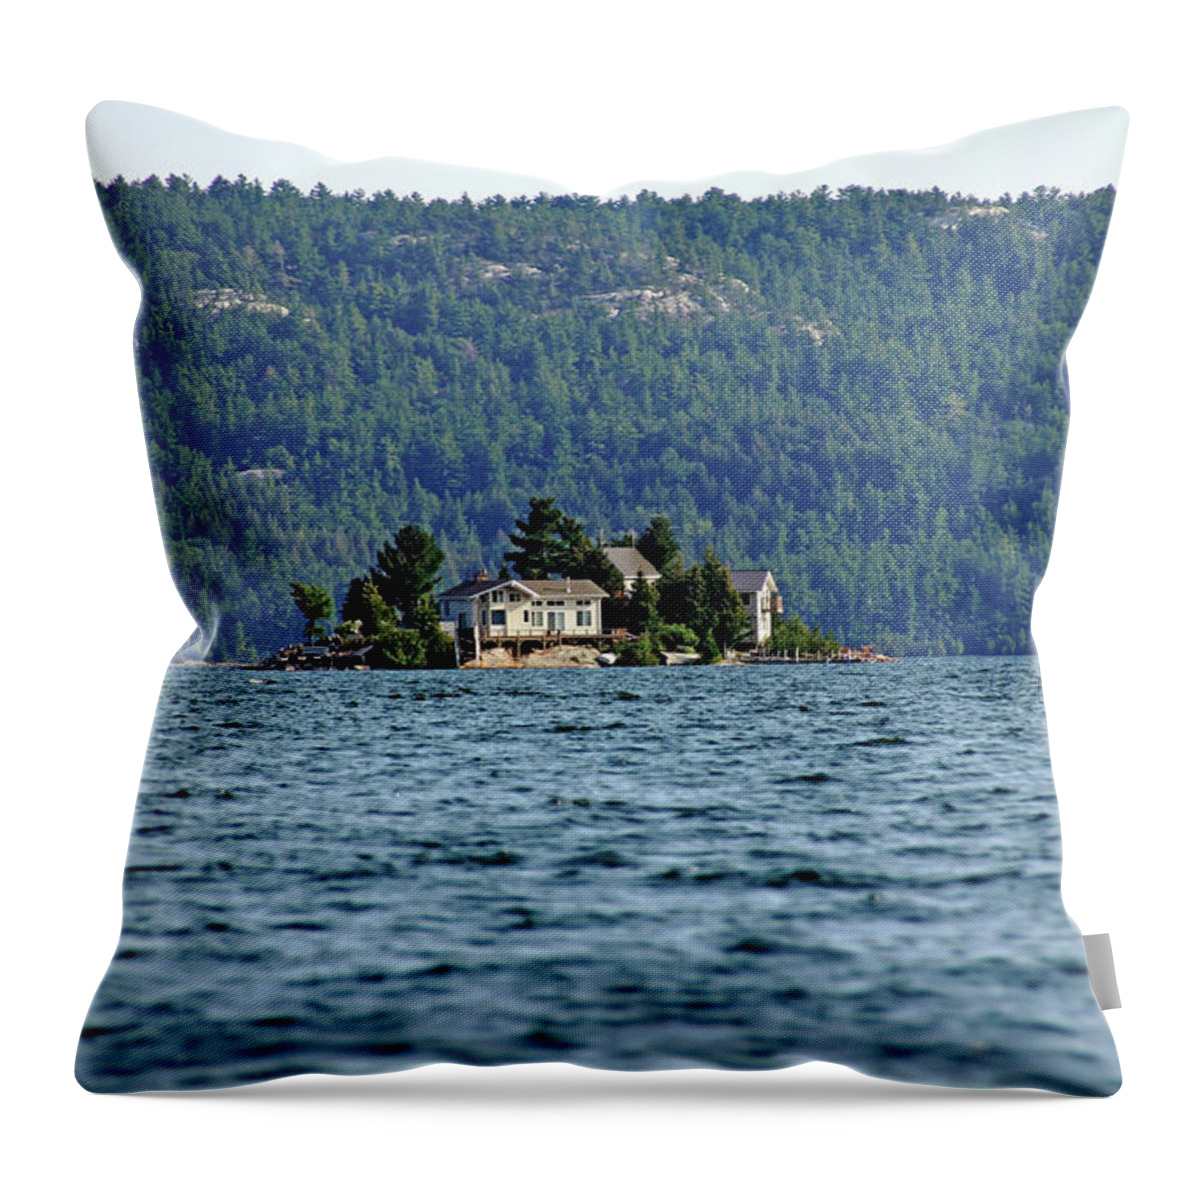 Mcgregor Bay Throw Pillow featuring the photograph Island Life McGregor Bay by Debbie Oppermann